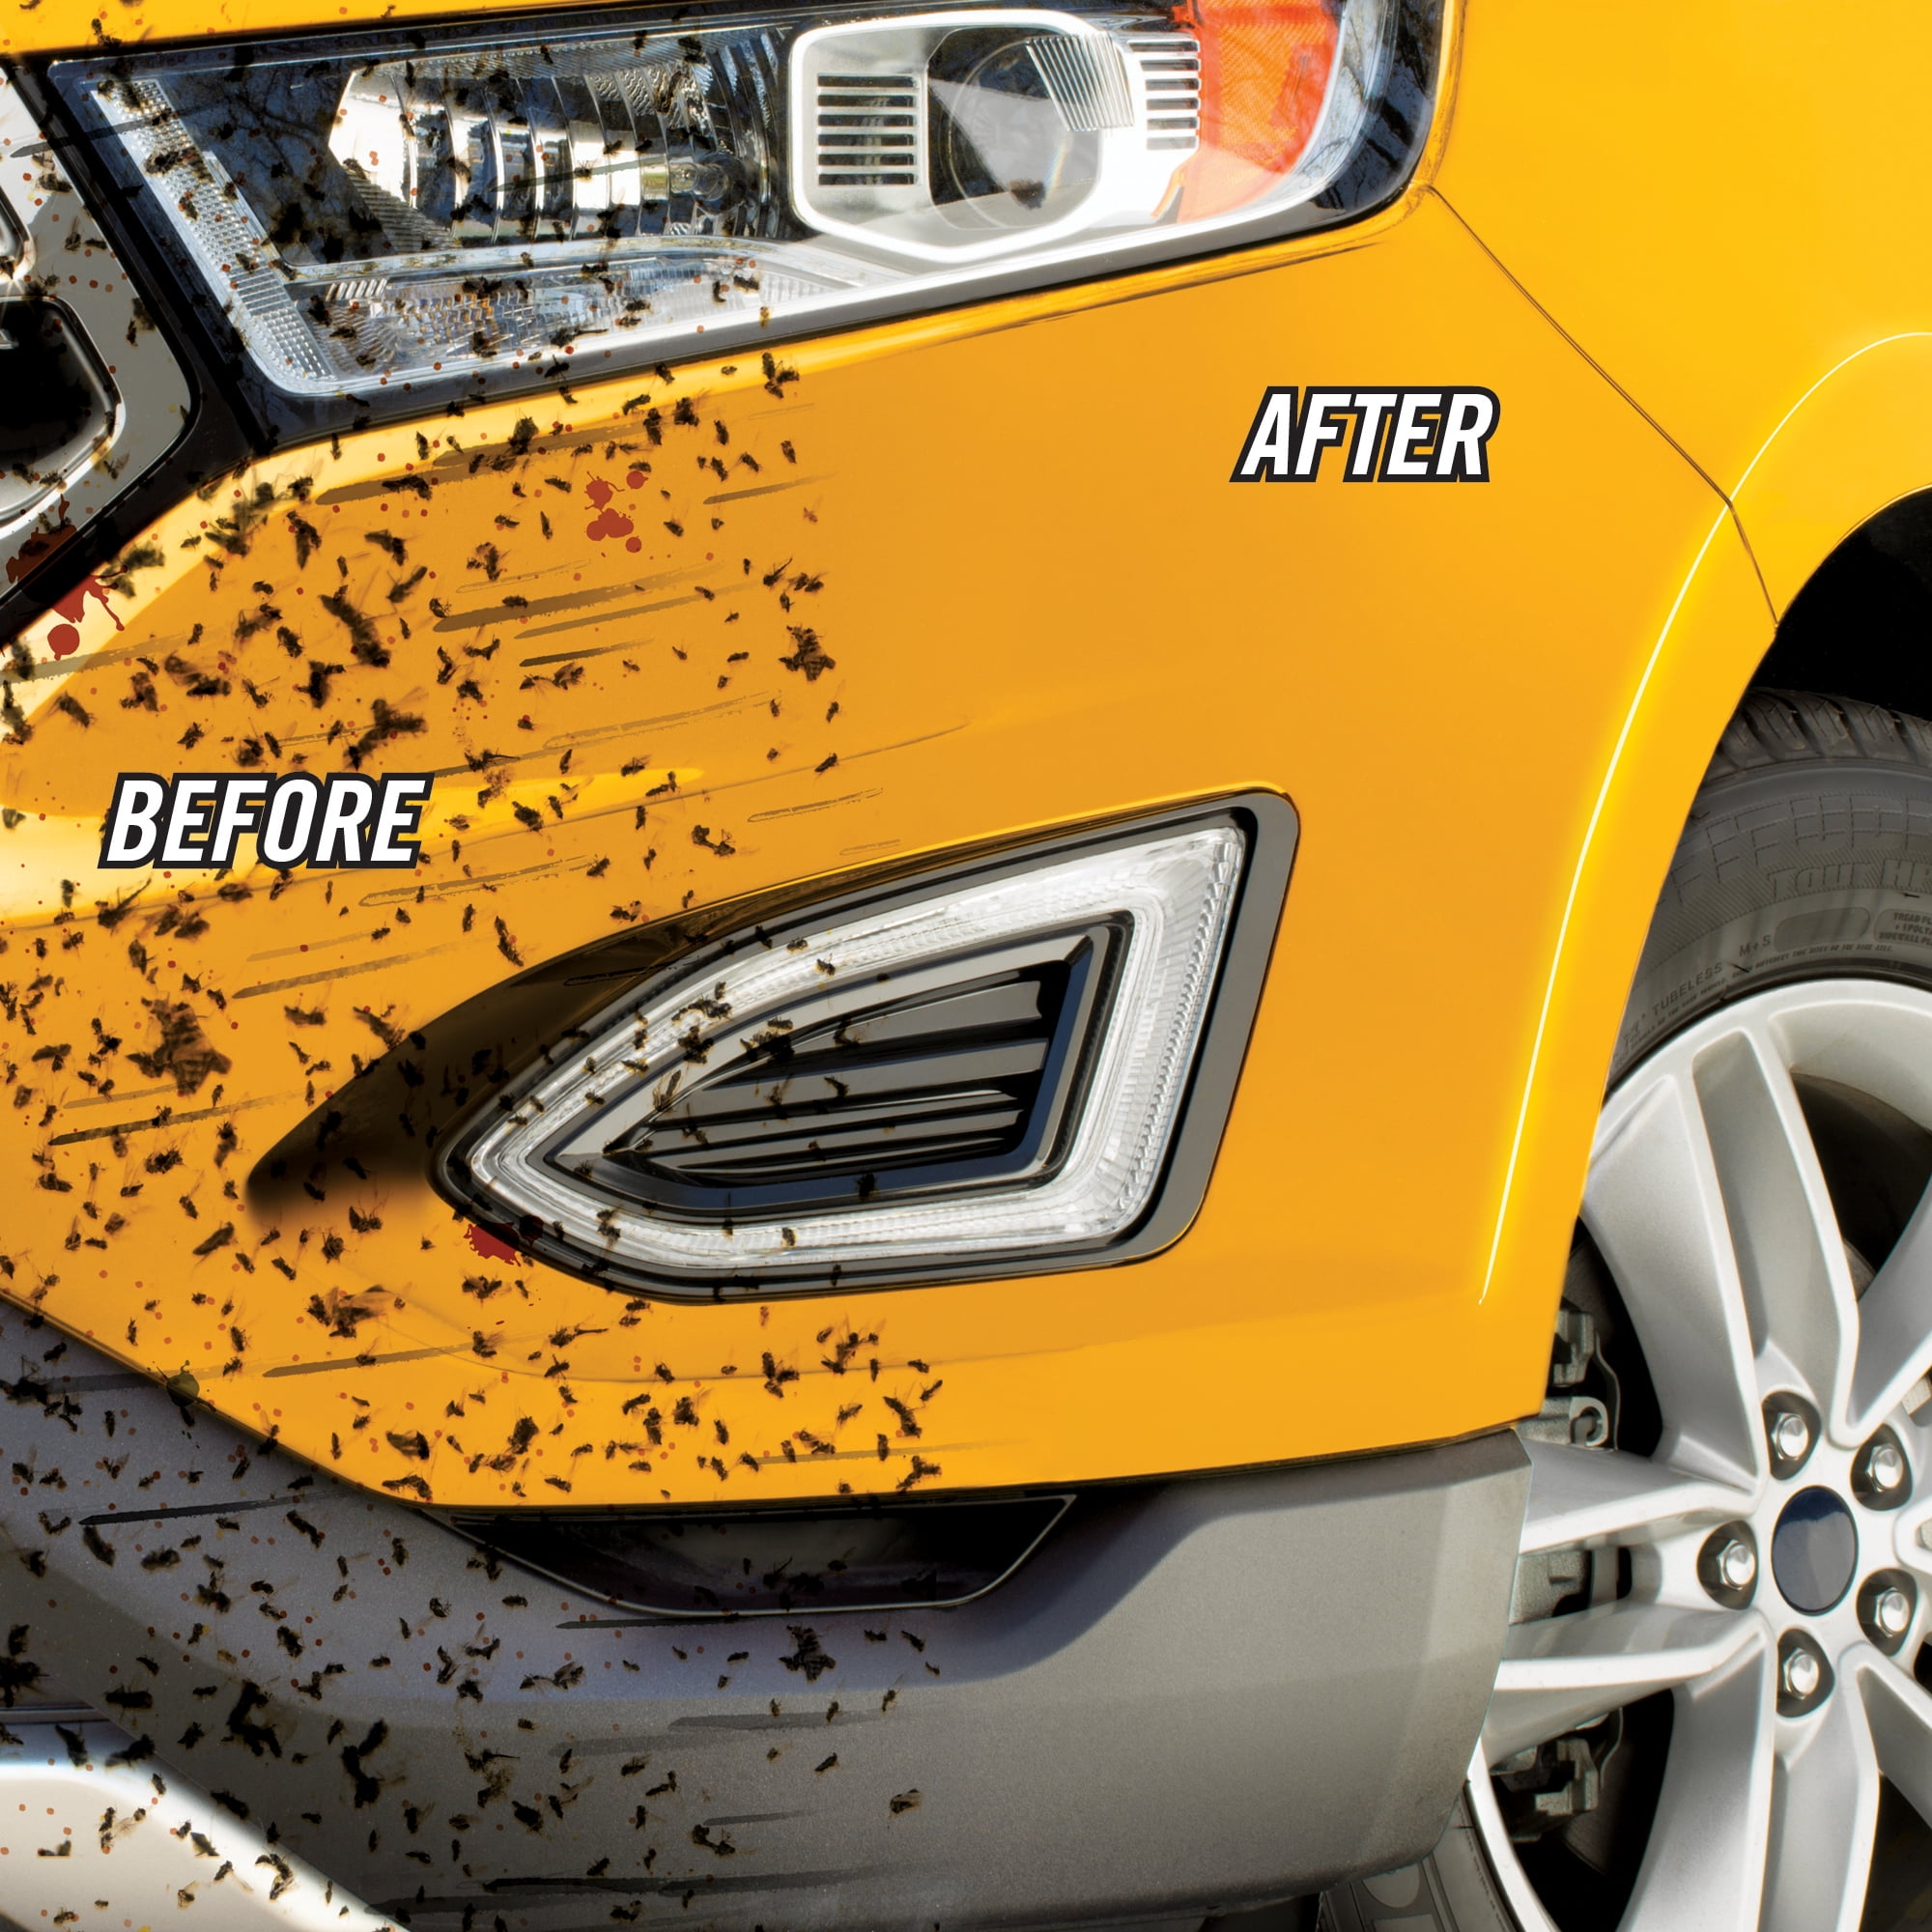 Turtle Wax - 🔔🔔🔔🔔🔔 Turtle Wax Scratch Repair & Renew is the ONLY  scratch product with HEAL & SEAL TECHNOLOGY formulated with precision  platelets to safely remove scratches, swirls, paint transfer, water